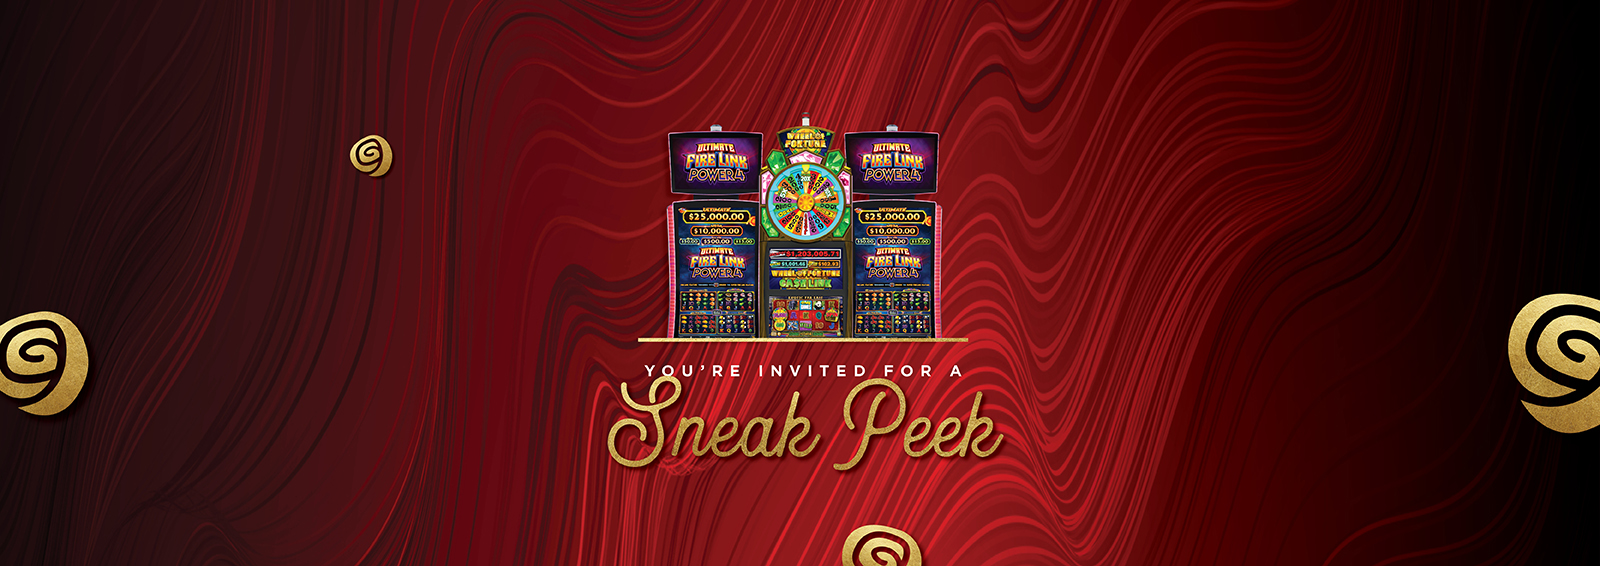 You're invited for a sneak peek